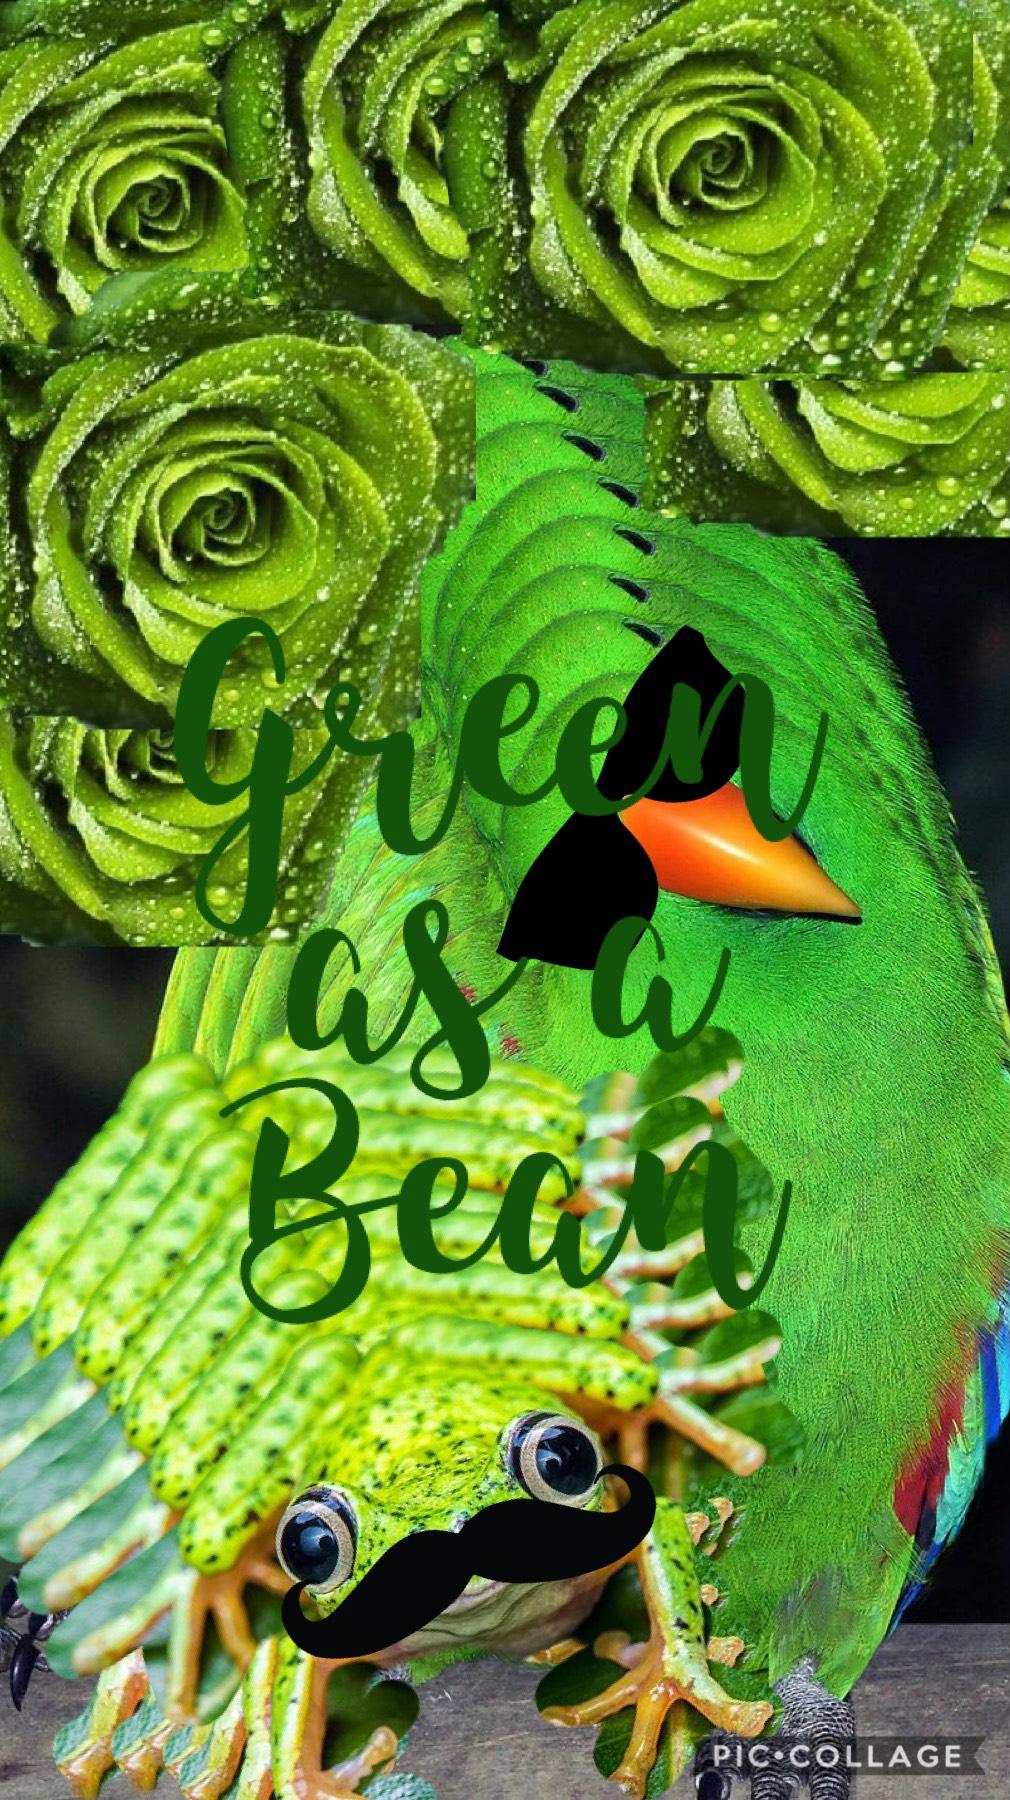 Stay Green! Reuse Reduce Recycle! Have a happy day!